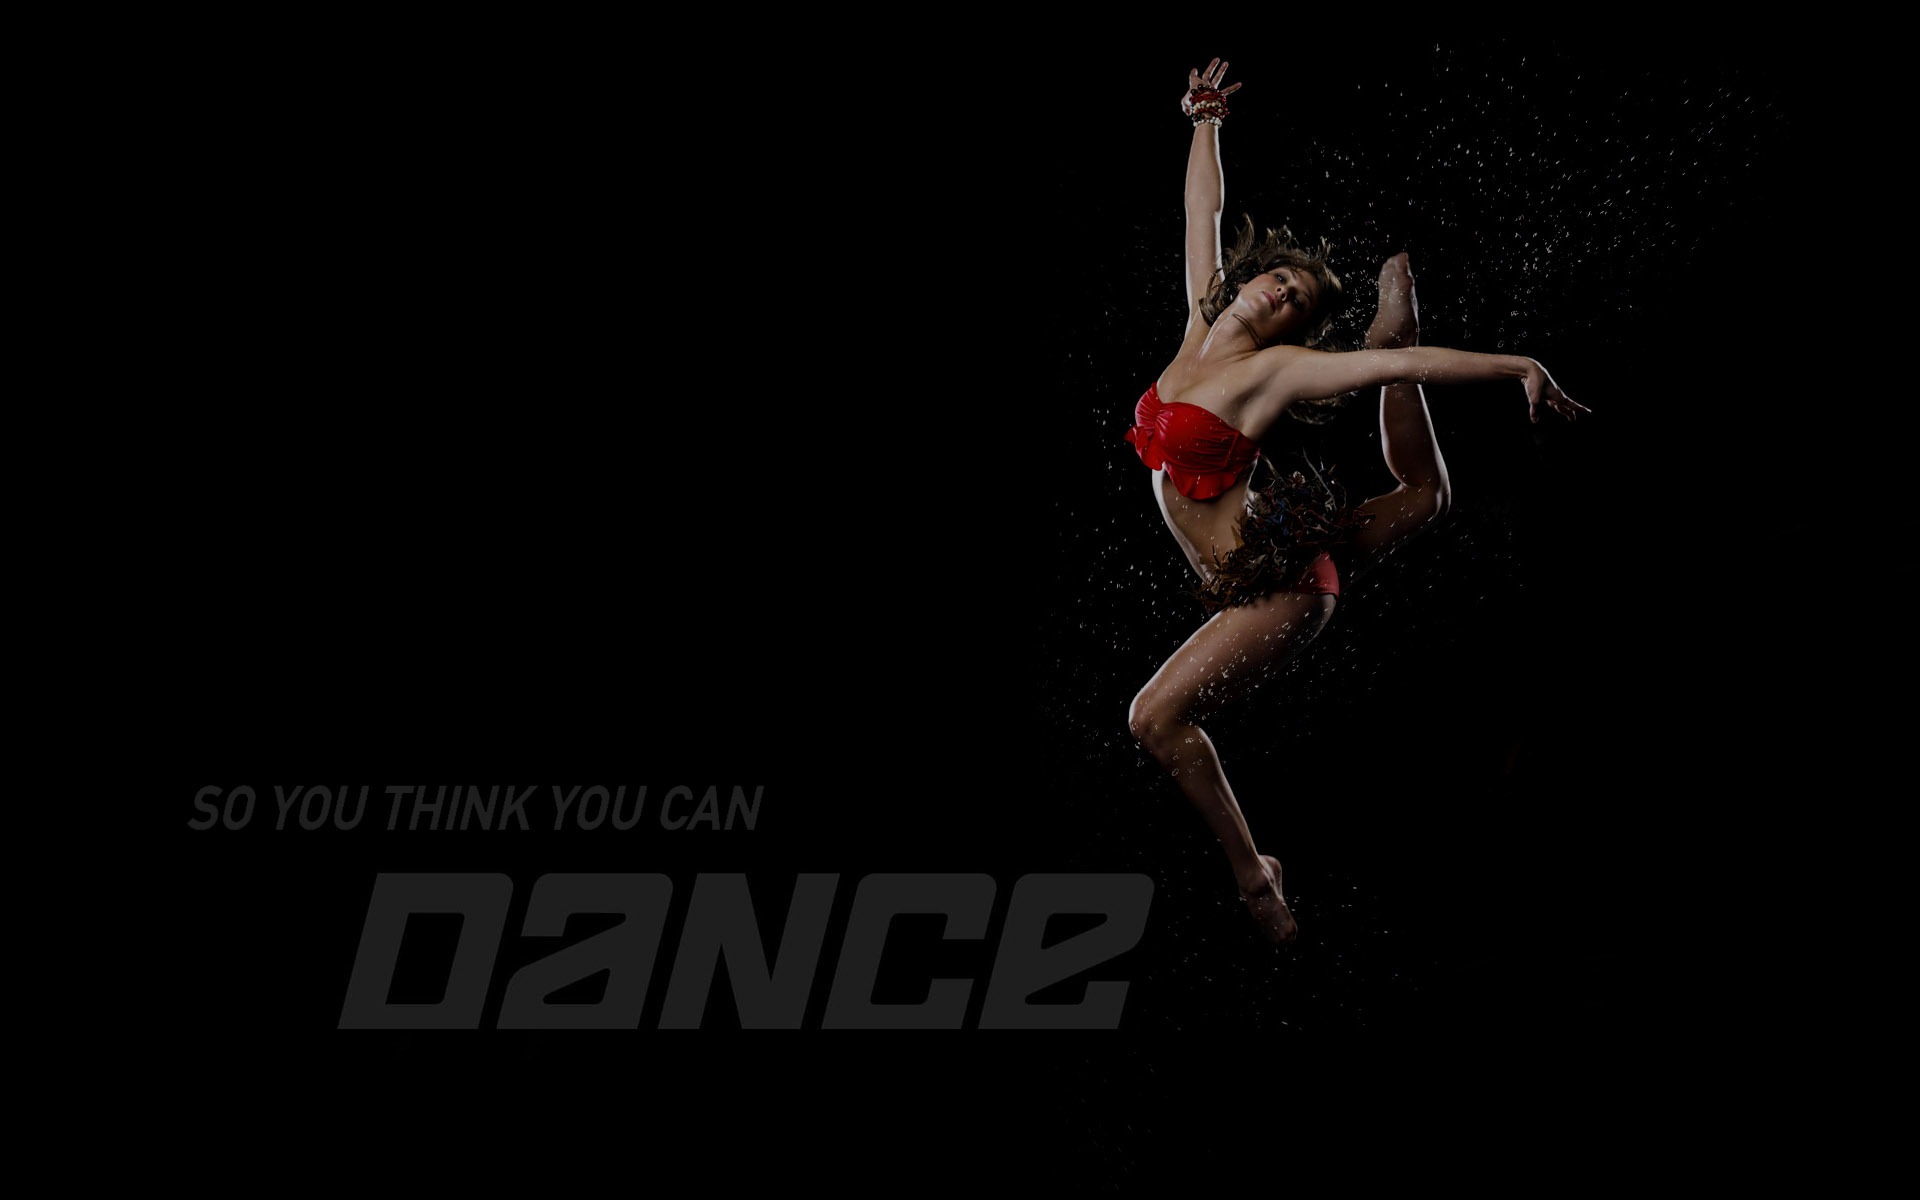 So You Think You Can Dance 舞林争霸 壁纸(二)13 - 1920x1200